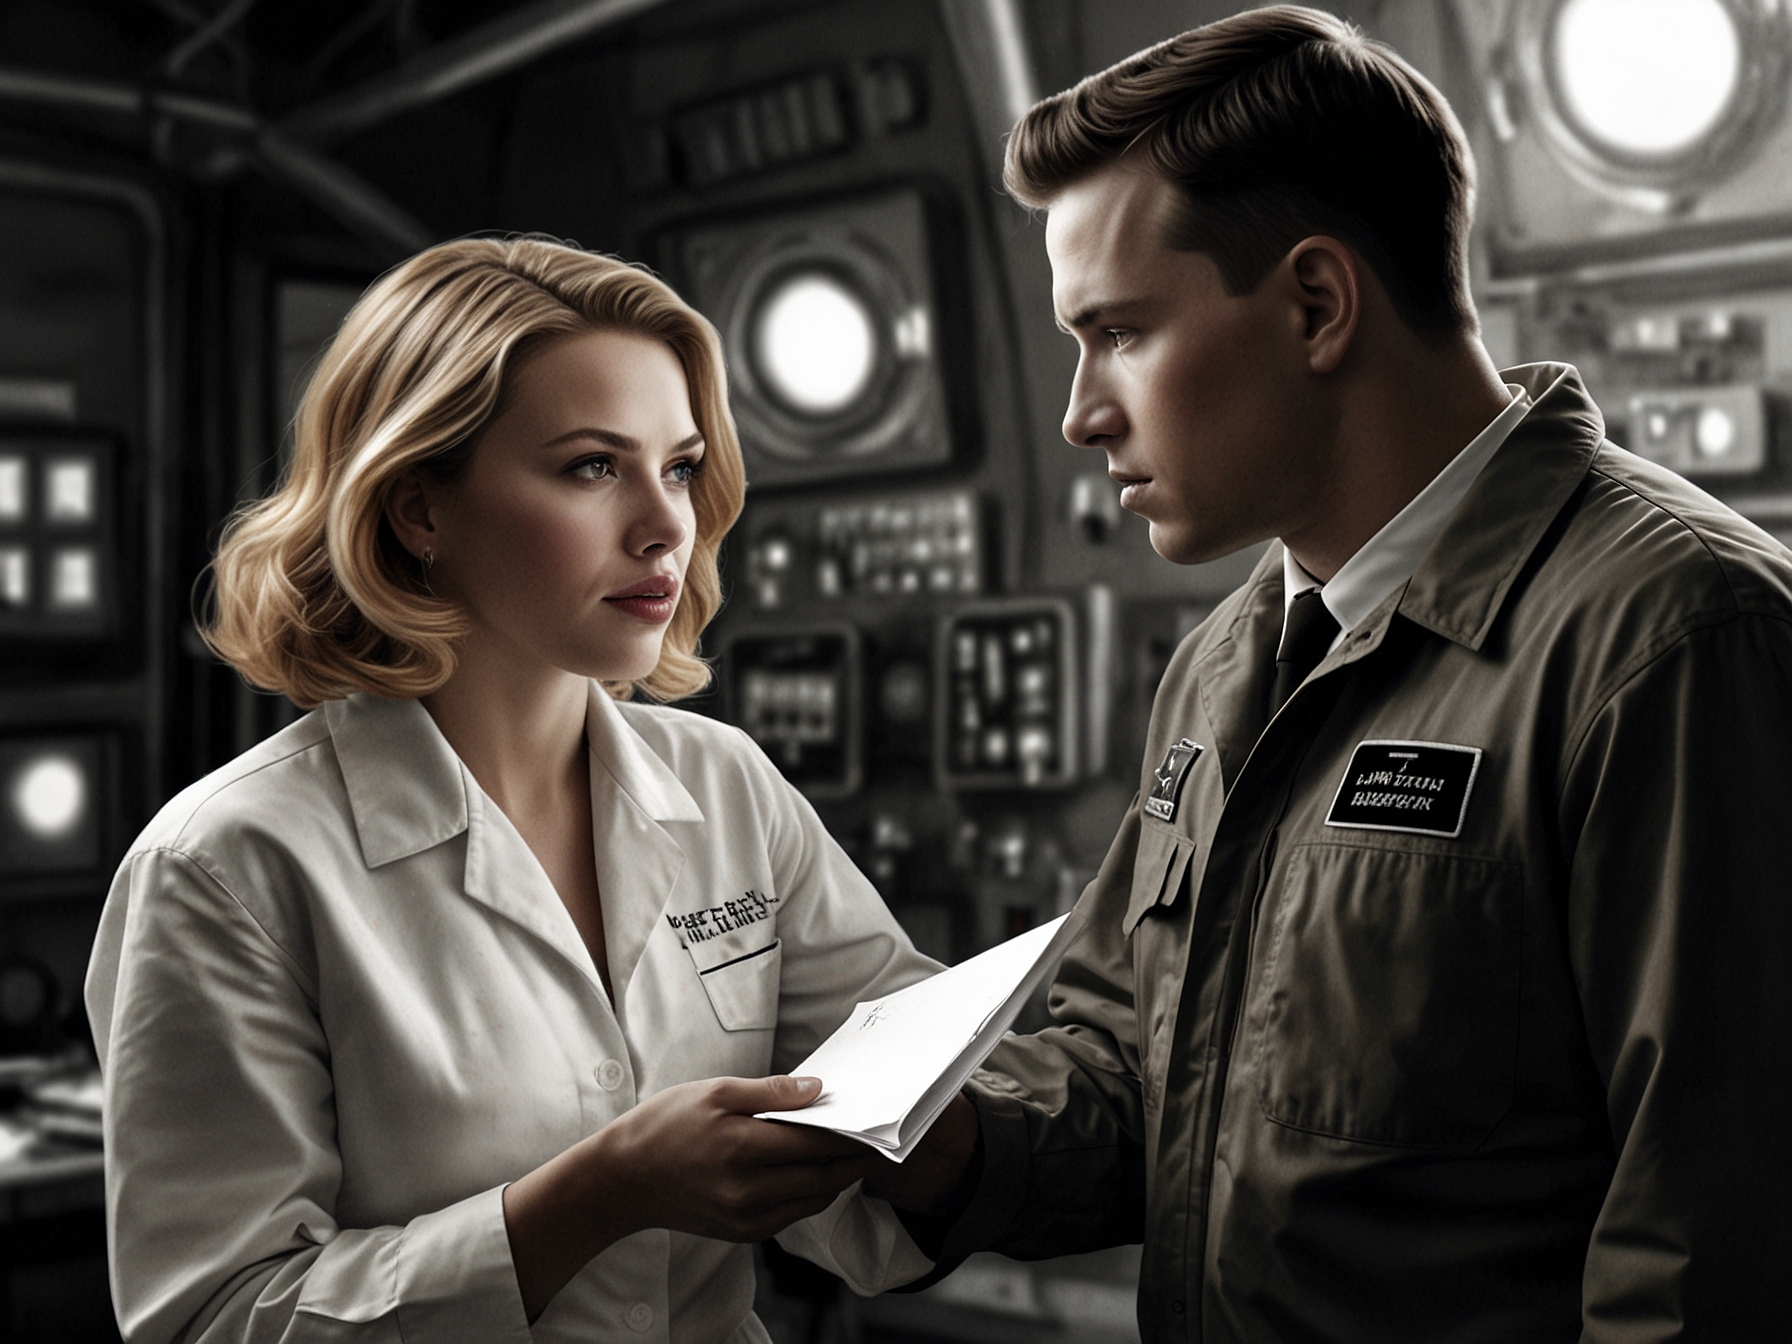 Scarlett Johansson as scientist Vivian Hayes and Channing Tatum as engineer Jack Cowan, working together on a secret project to create a fake moon landing set.